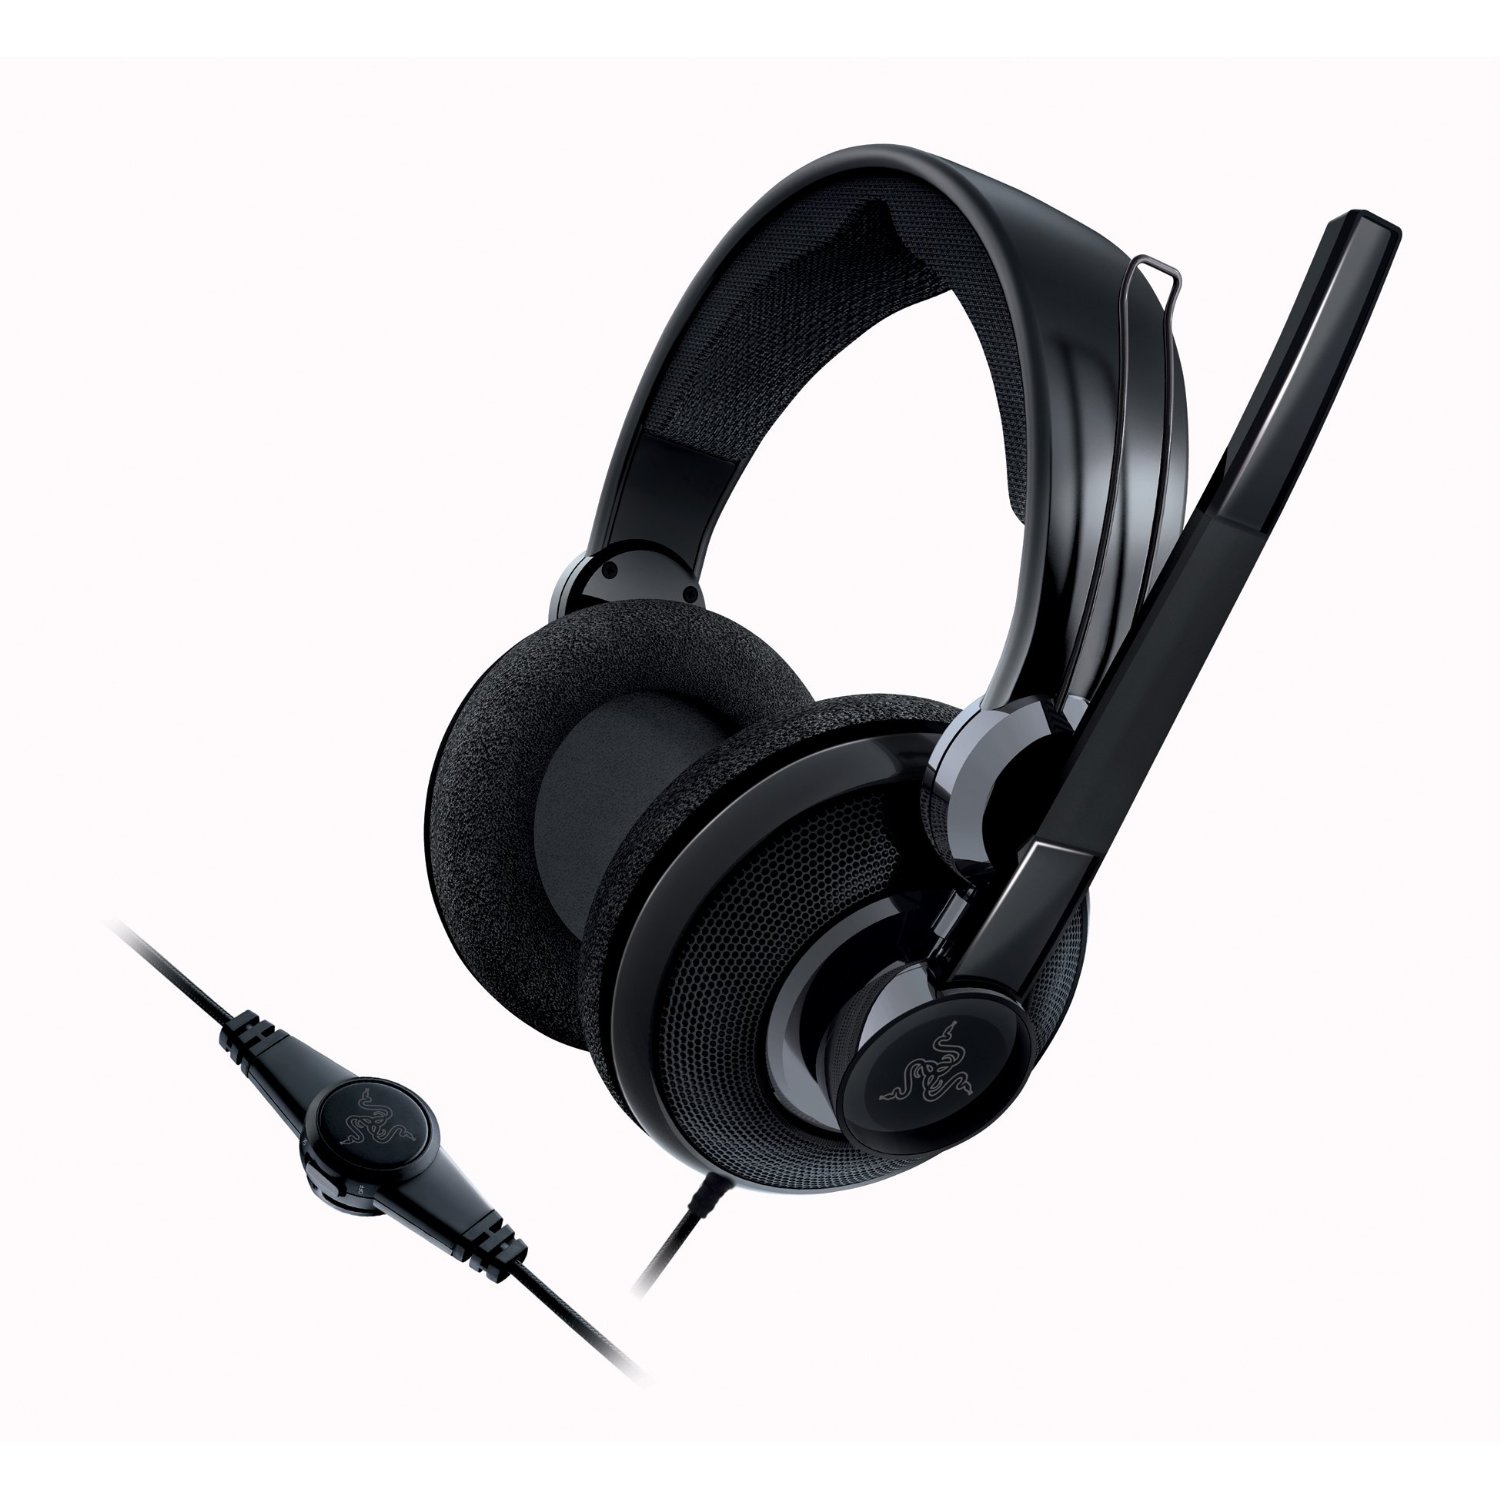 http://thetechjournal.com/wp-content/uploads/images/1111/1321790815-razer-carcharias-gaming-headset-5.jpg